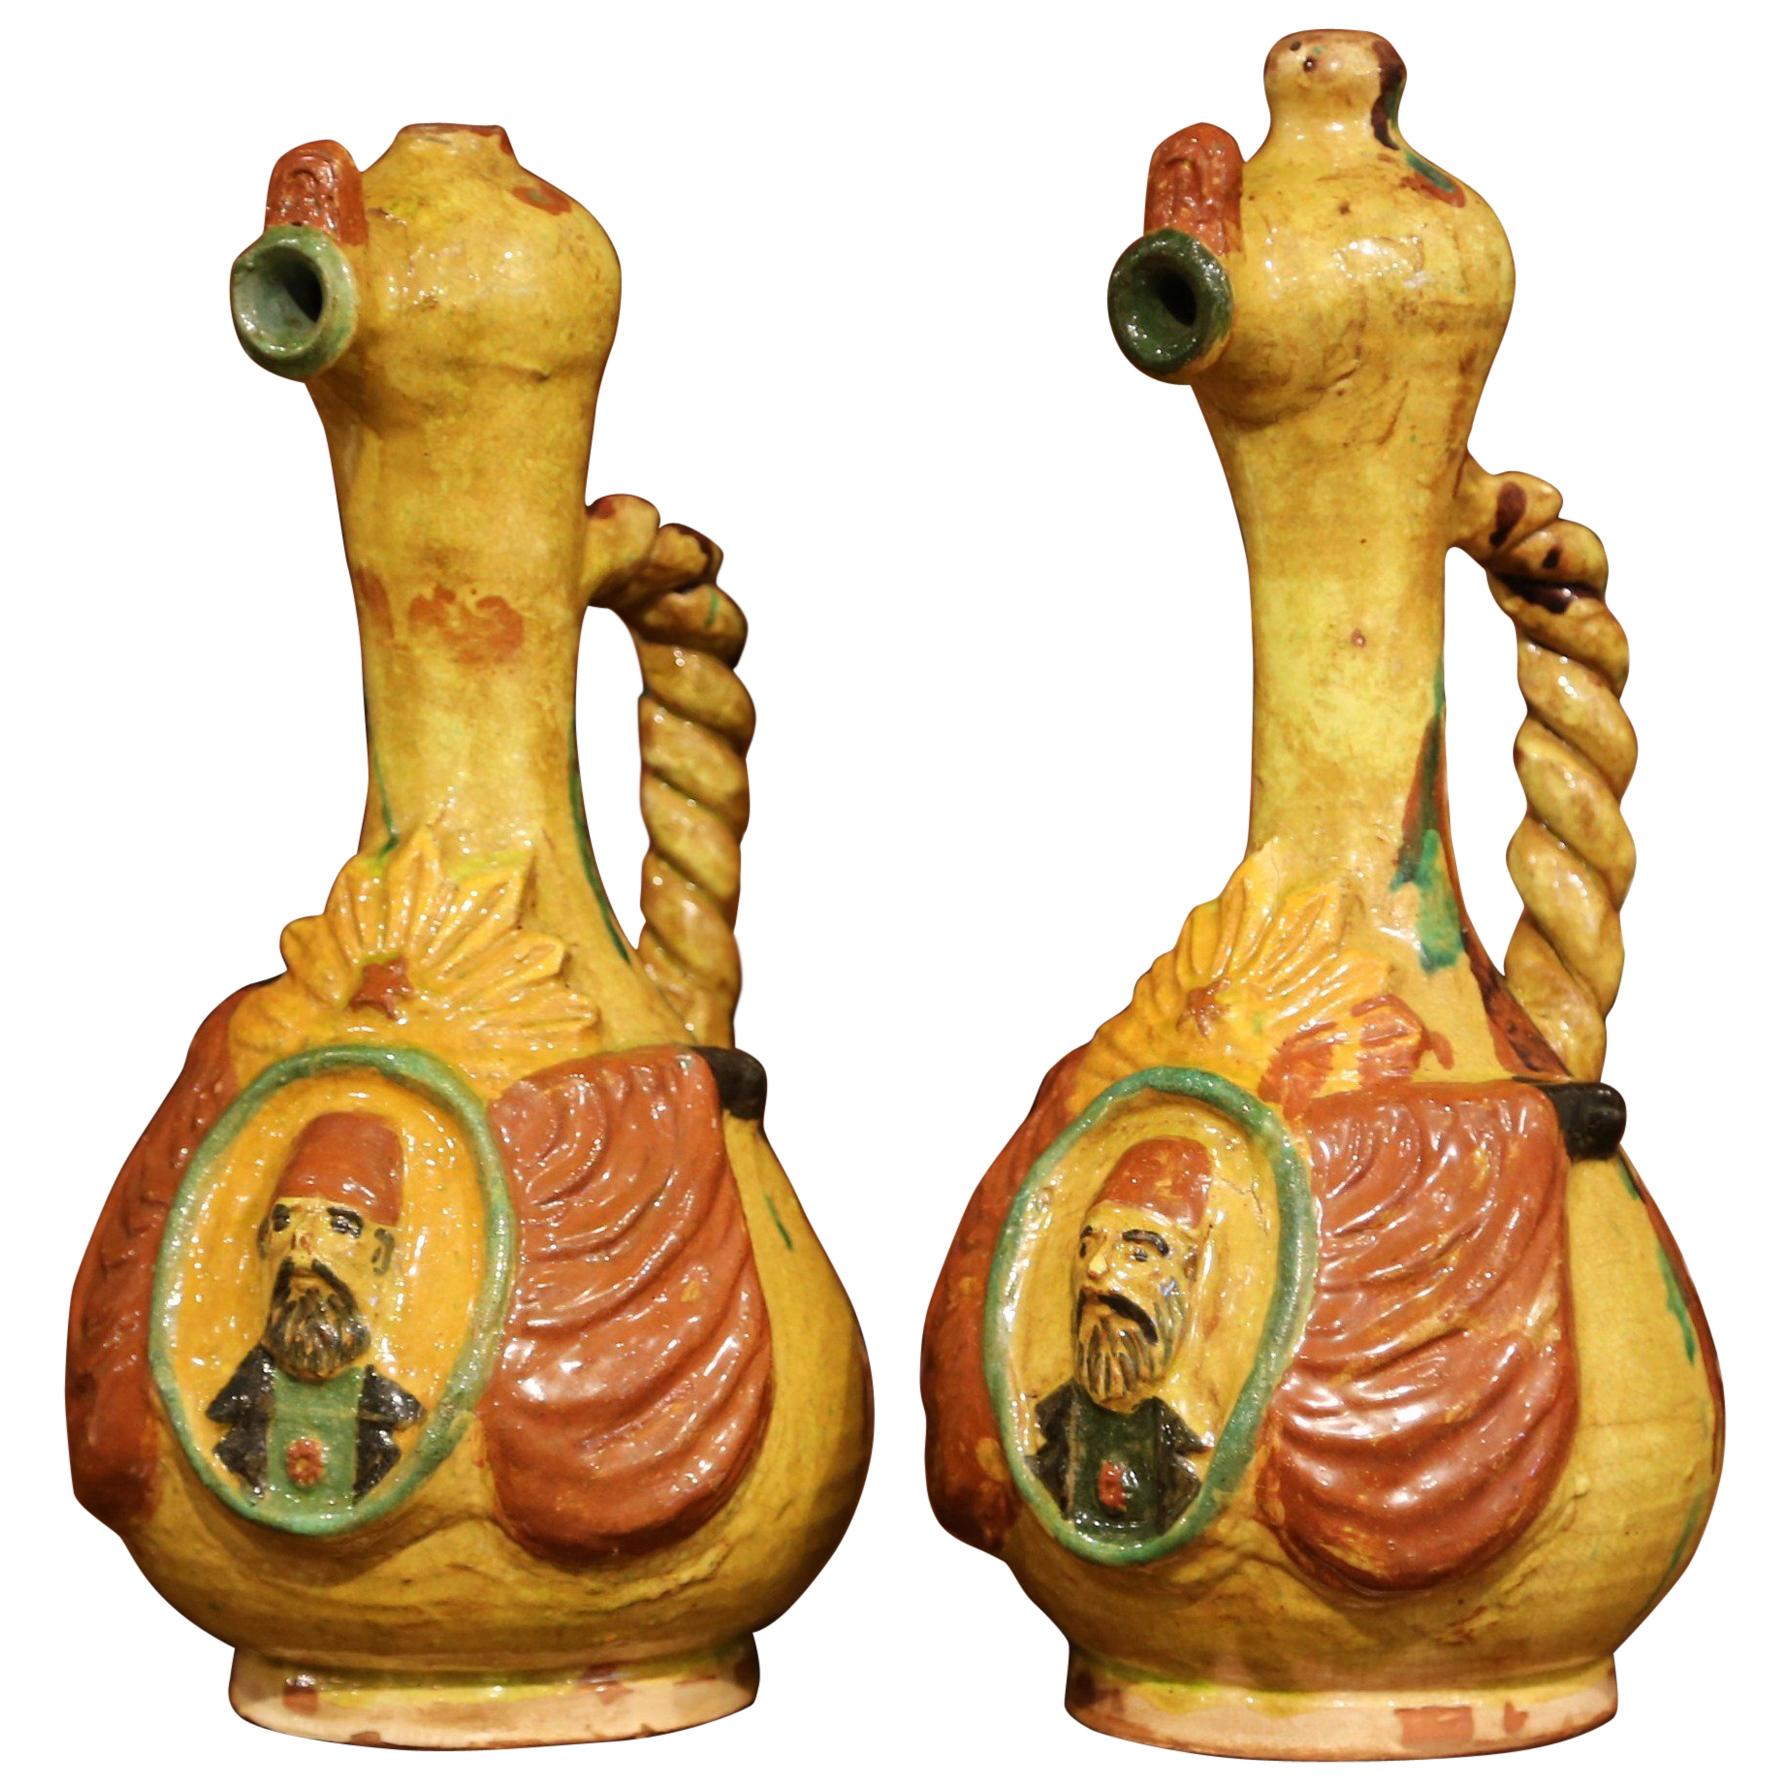 Early 20th Century Turkish Ceramic Hand-Painted Oil Pitchers with Handles, Pair